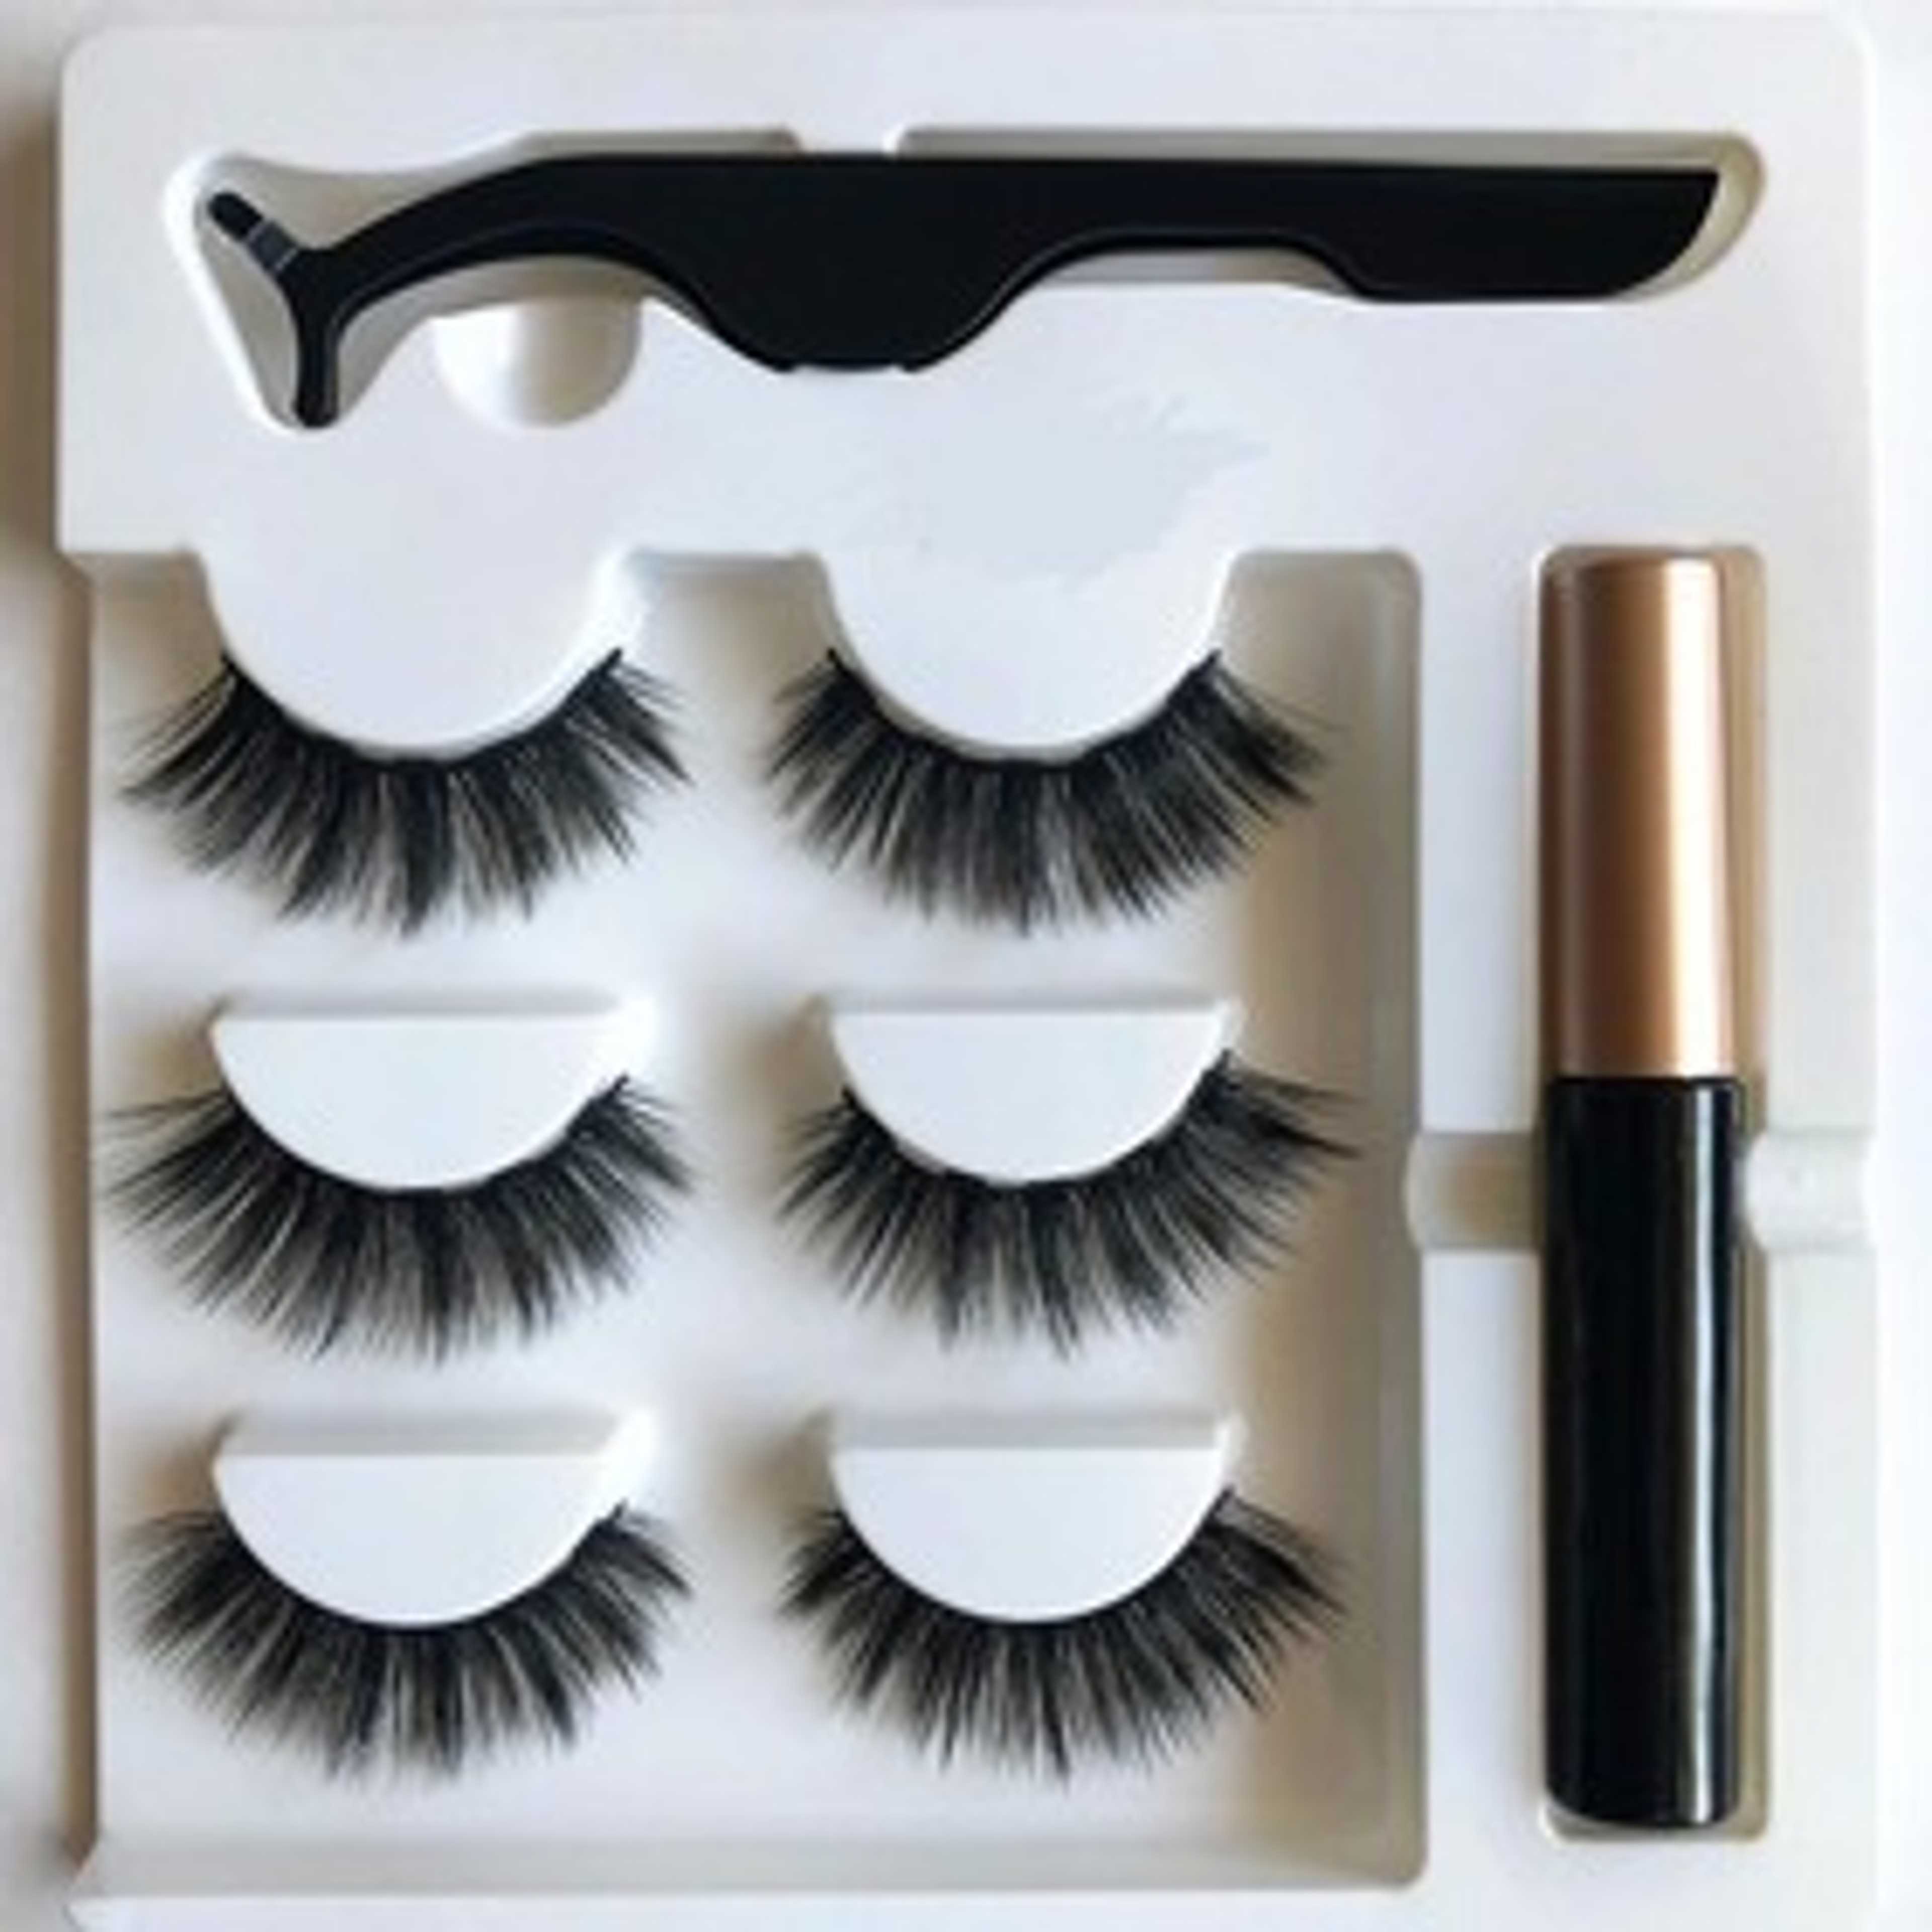 3 Set of Magnetic Lashes